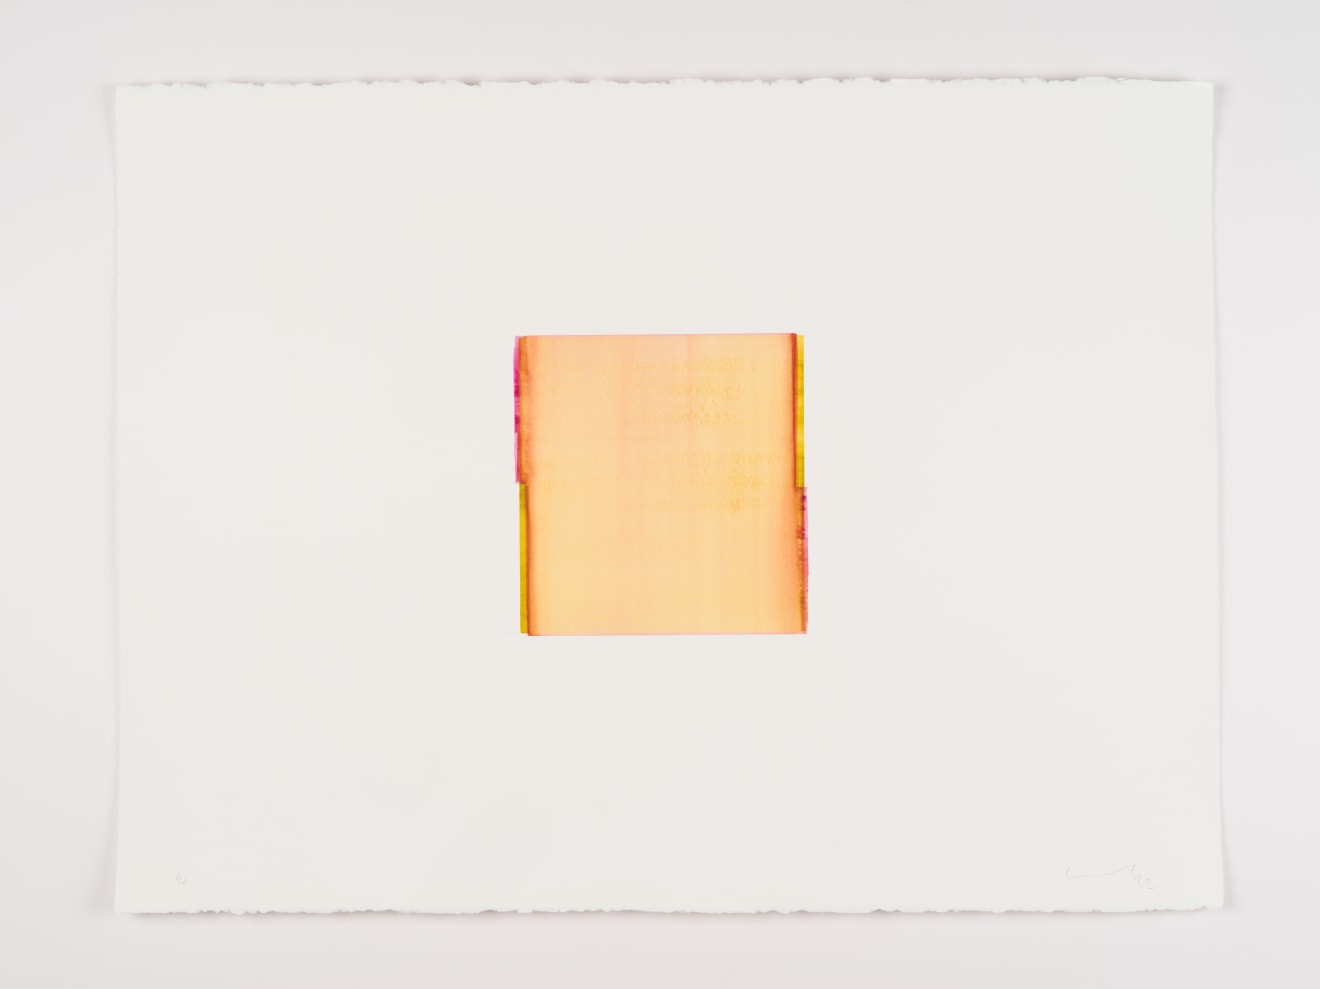 Callum Innes Gold Green / Magenta, 2022 numbered, signed and dated by the artist, recto watercolor on Arches 600gsm HP paper: 22 13/16 x 30 5/16 inches (58 x 77 cm) framed: 25 1/8 x 32 1/8 x 1 3/4 inches (63.8 x 81.6 x 4.4 cm) (CI-14.22.W)